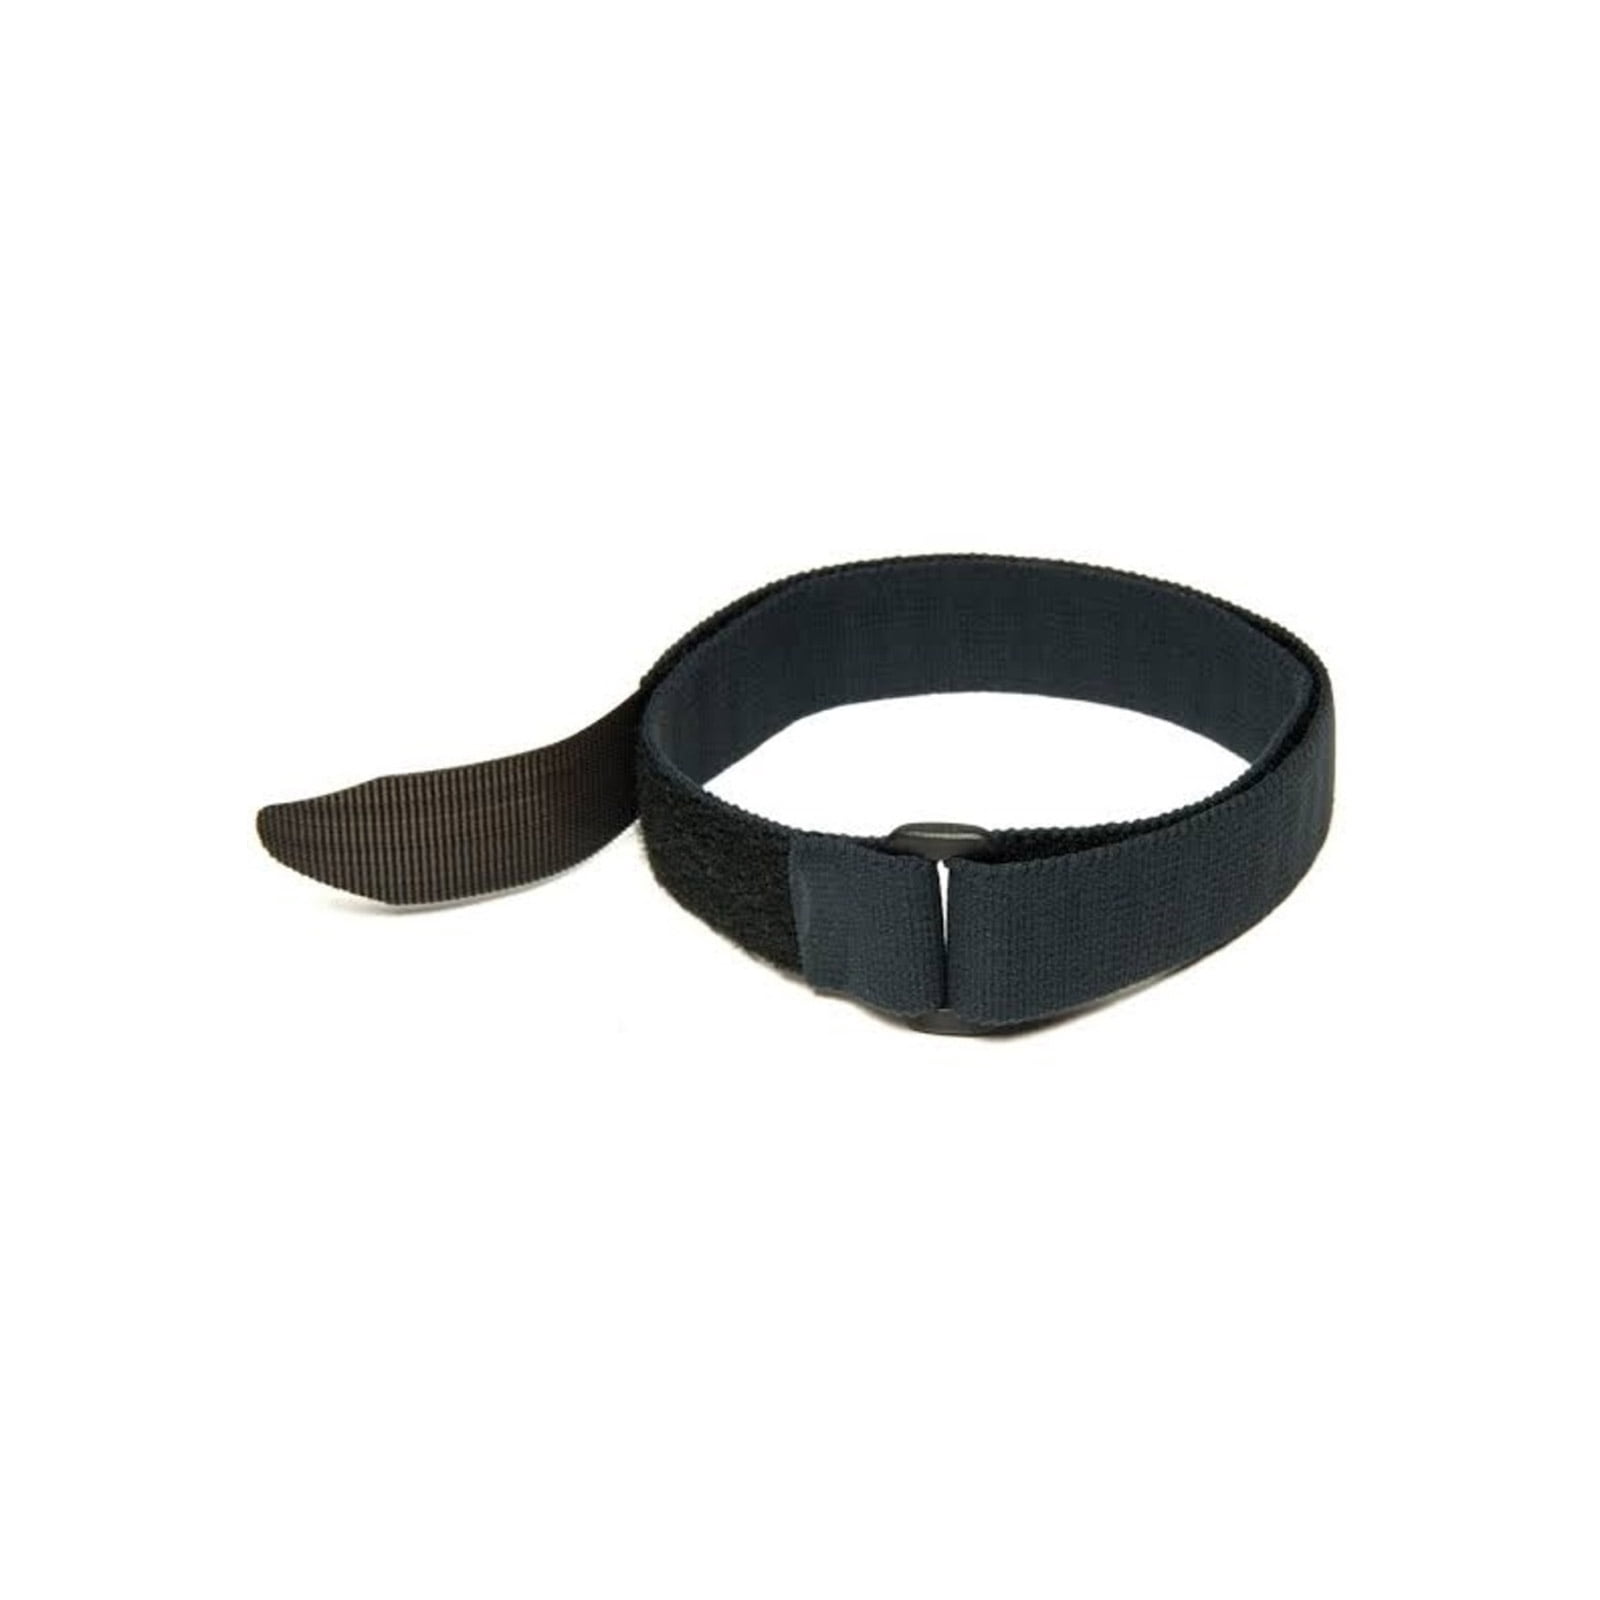 212-3B-25 All Strap, Black Surgical Velcro Strap, Extra Soft, 2W